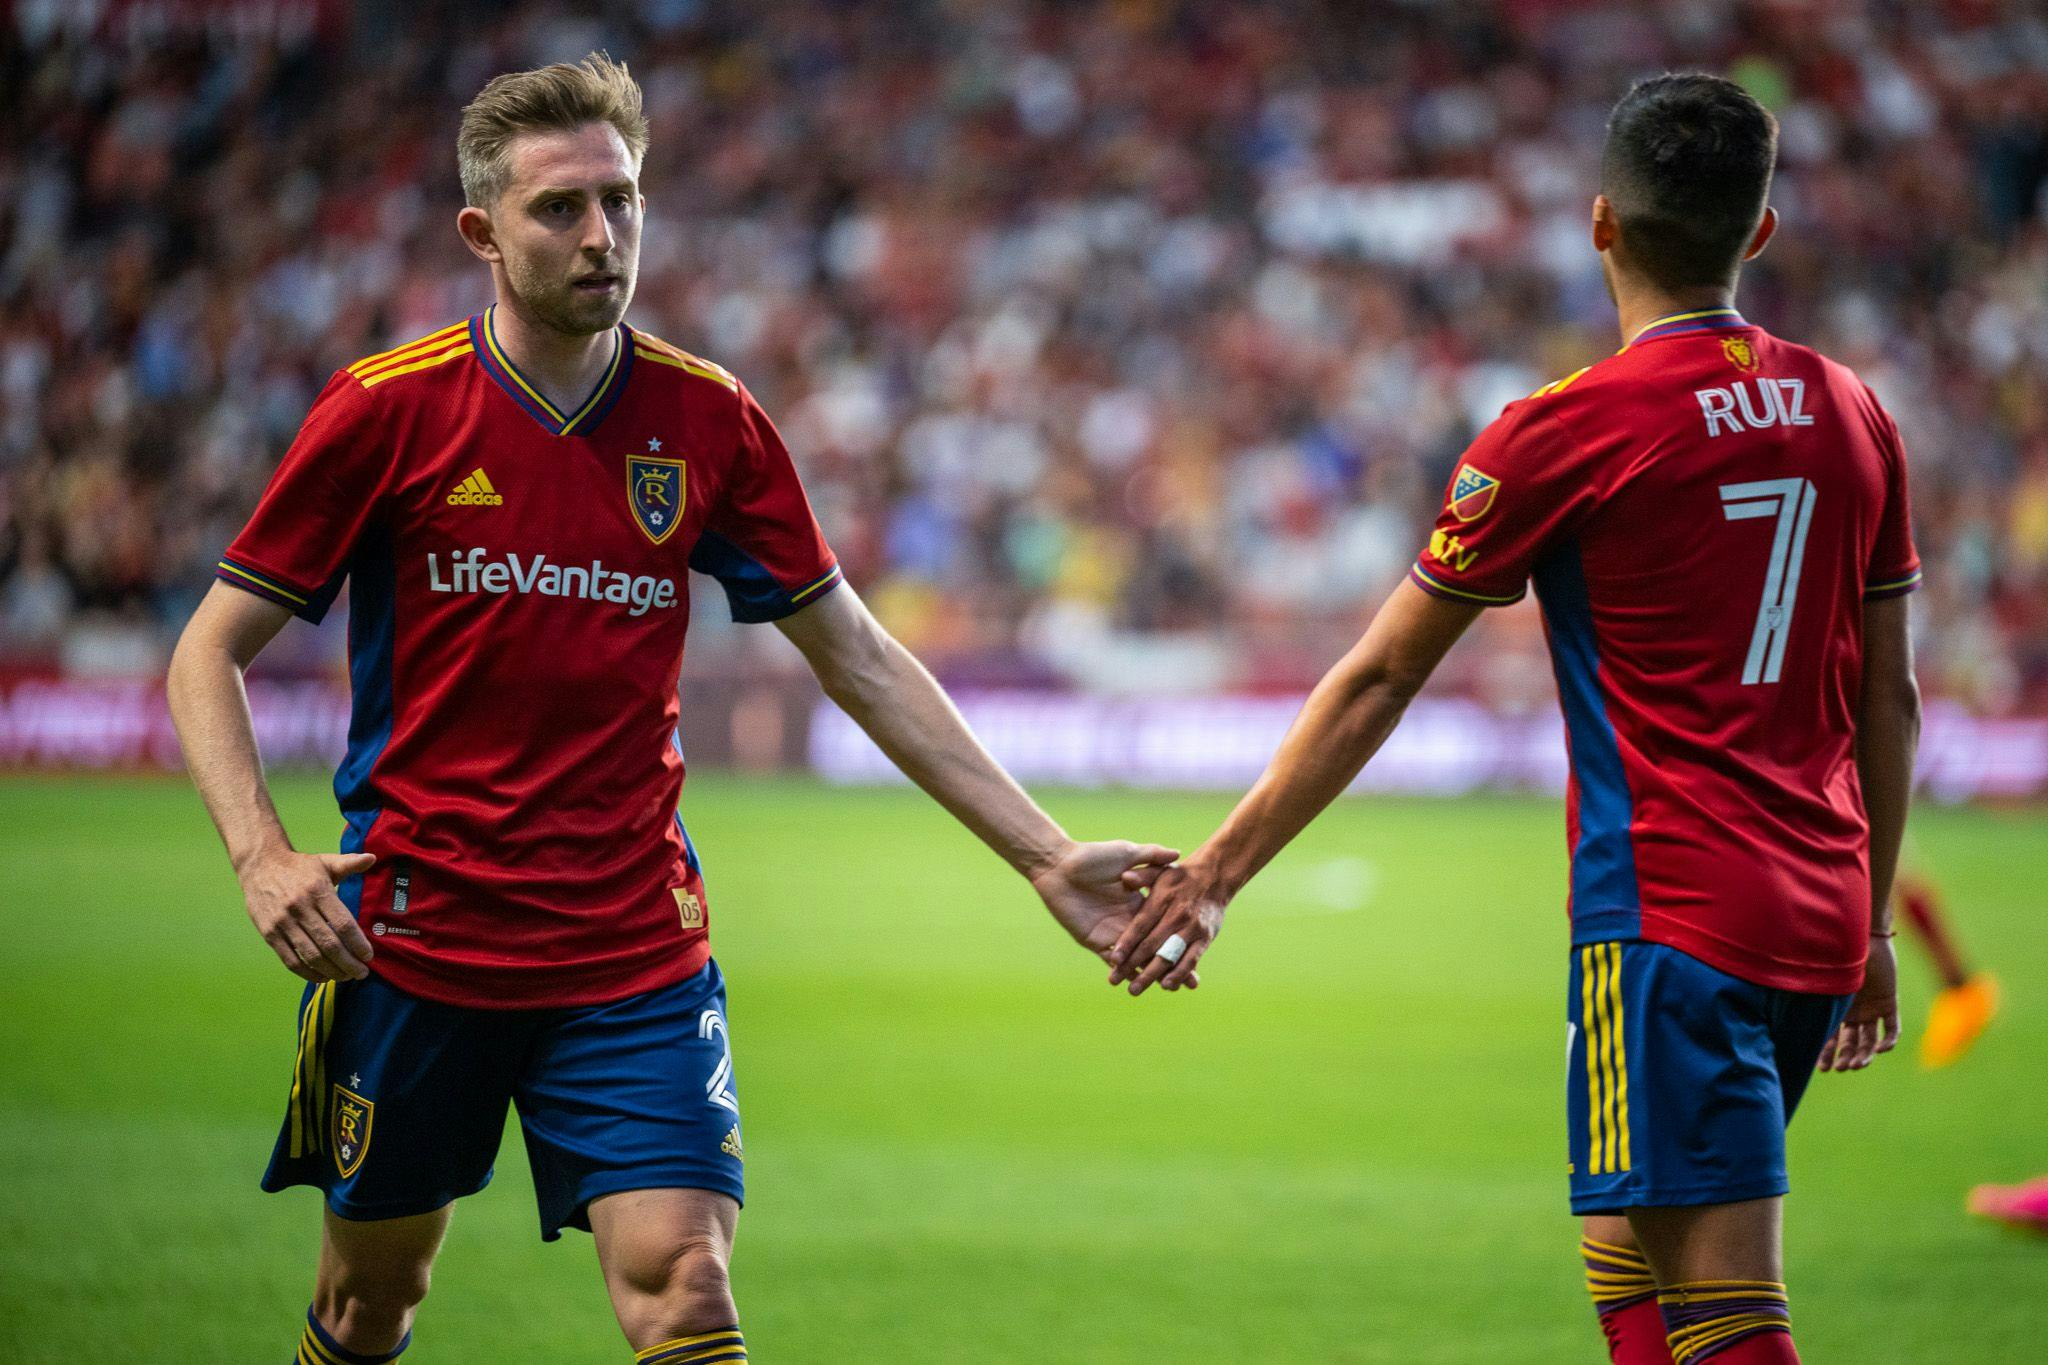 RSL vs. D.C. United: Player of the Match